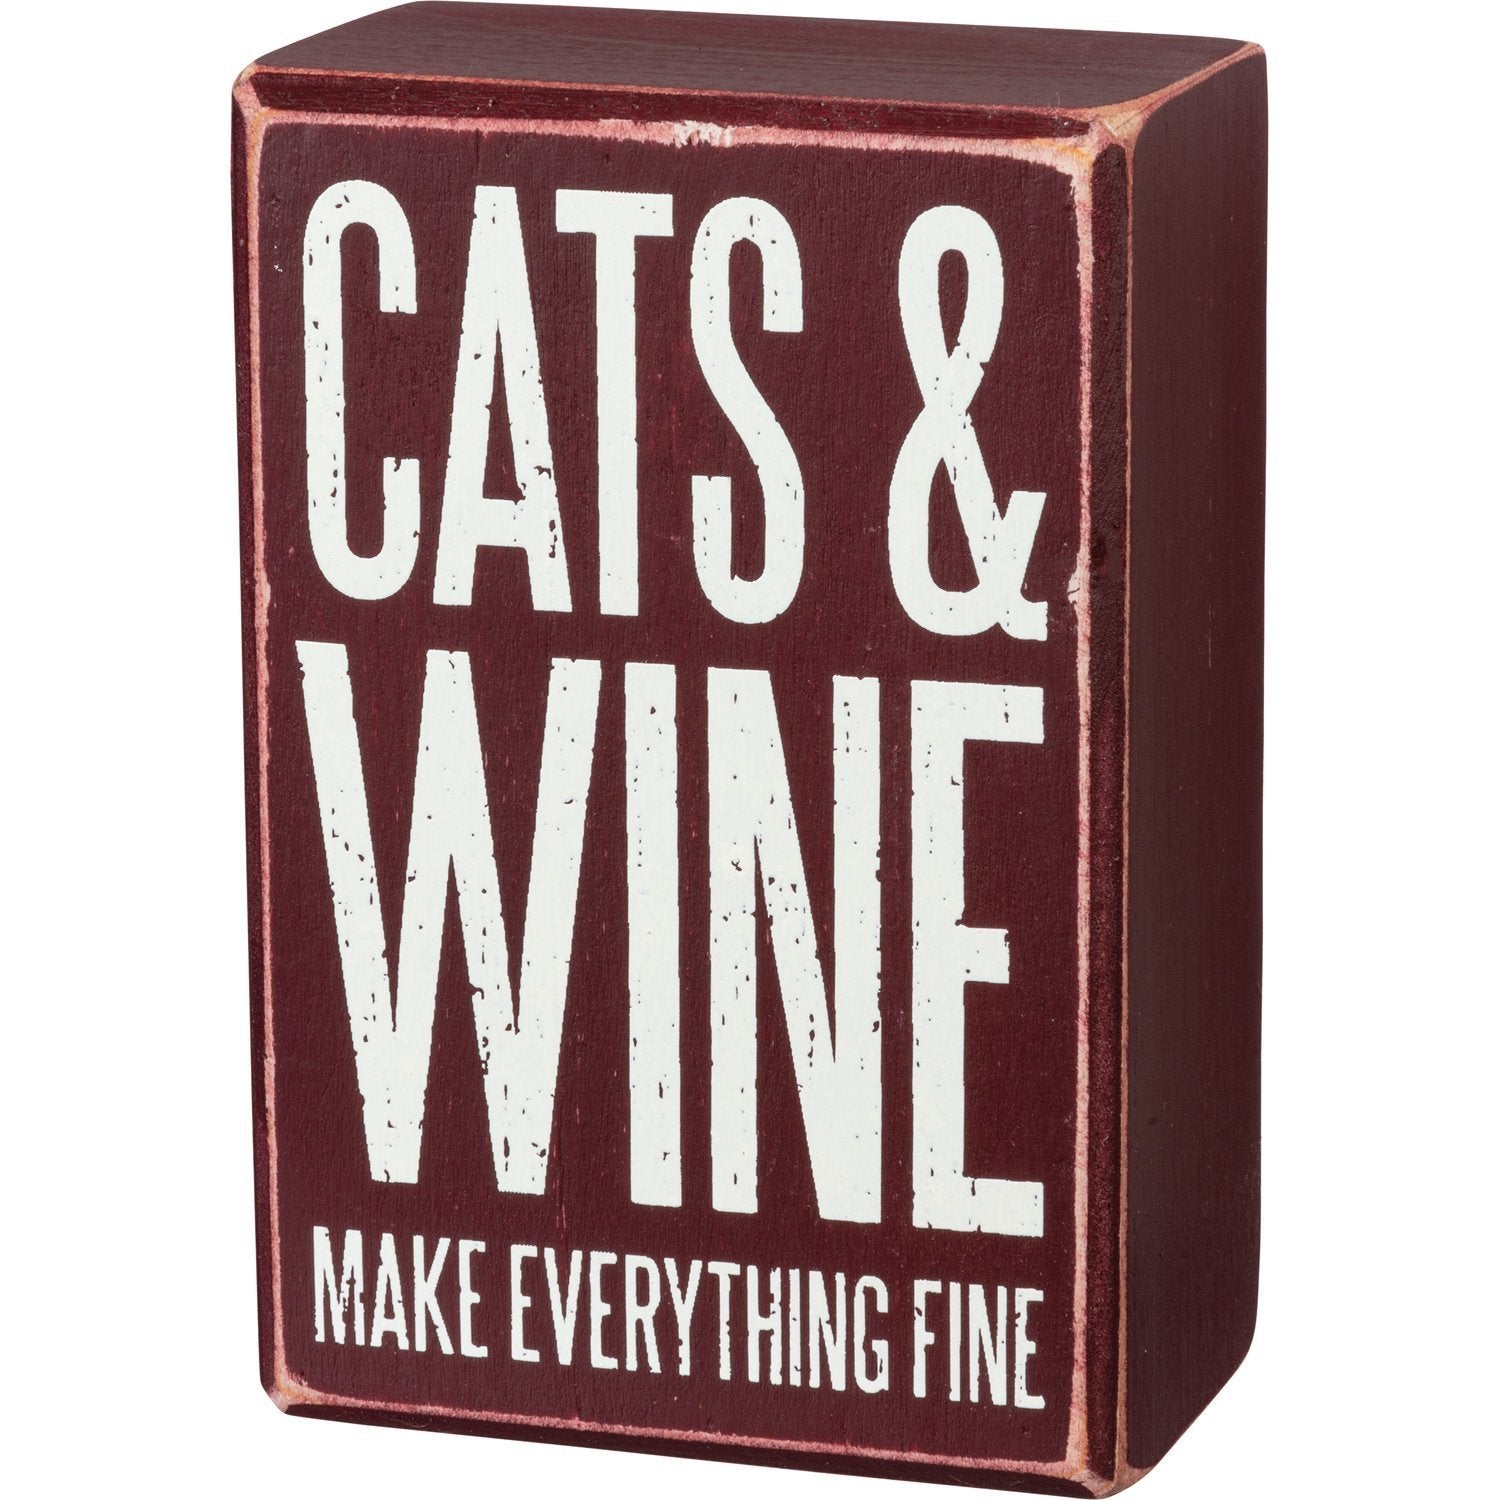 Gifts for Cat Lovers Who Love Wine, Cats And Wine Make Everything Fine Box Sign